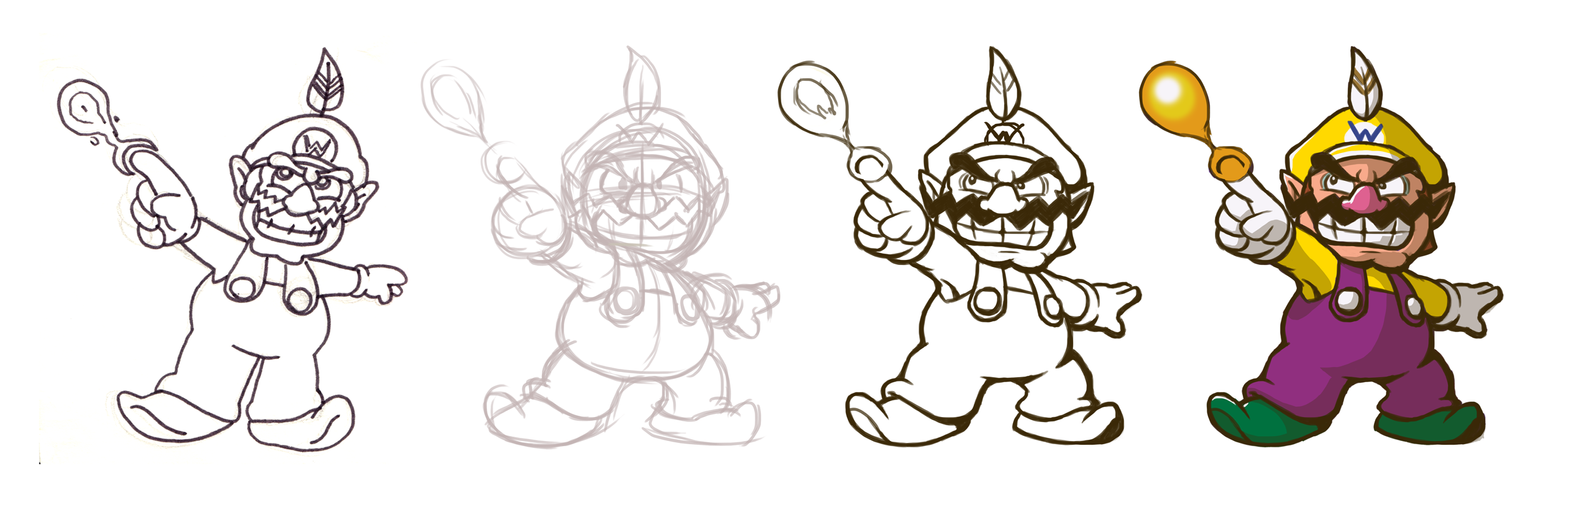 re_drawing_fire_wario_by_fryguy64-dc4epk1.png